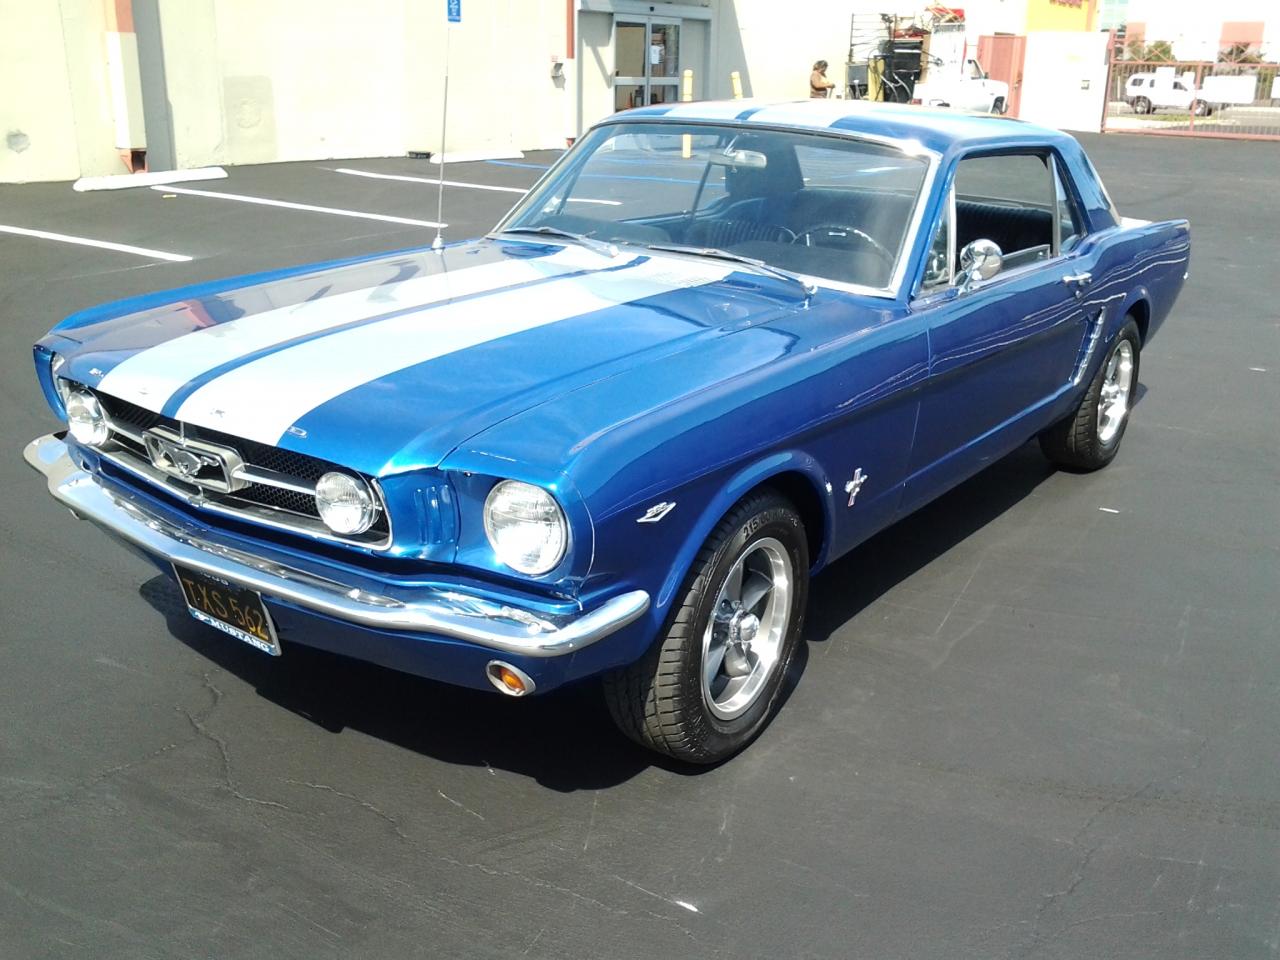 1965 Ford mustang for sale in southern california